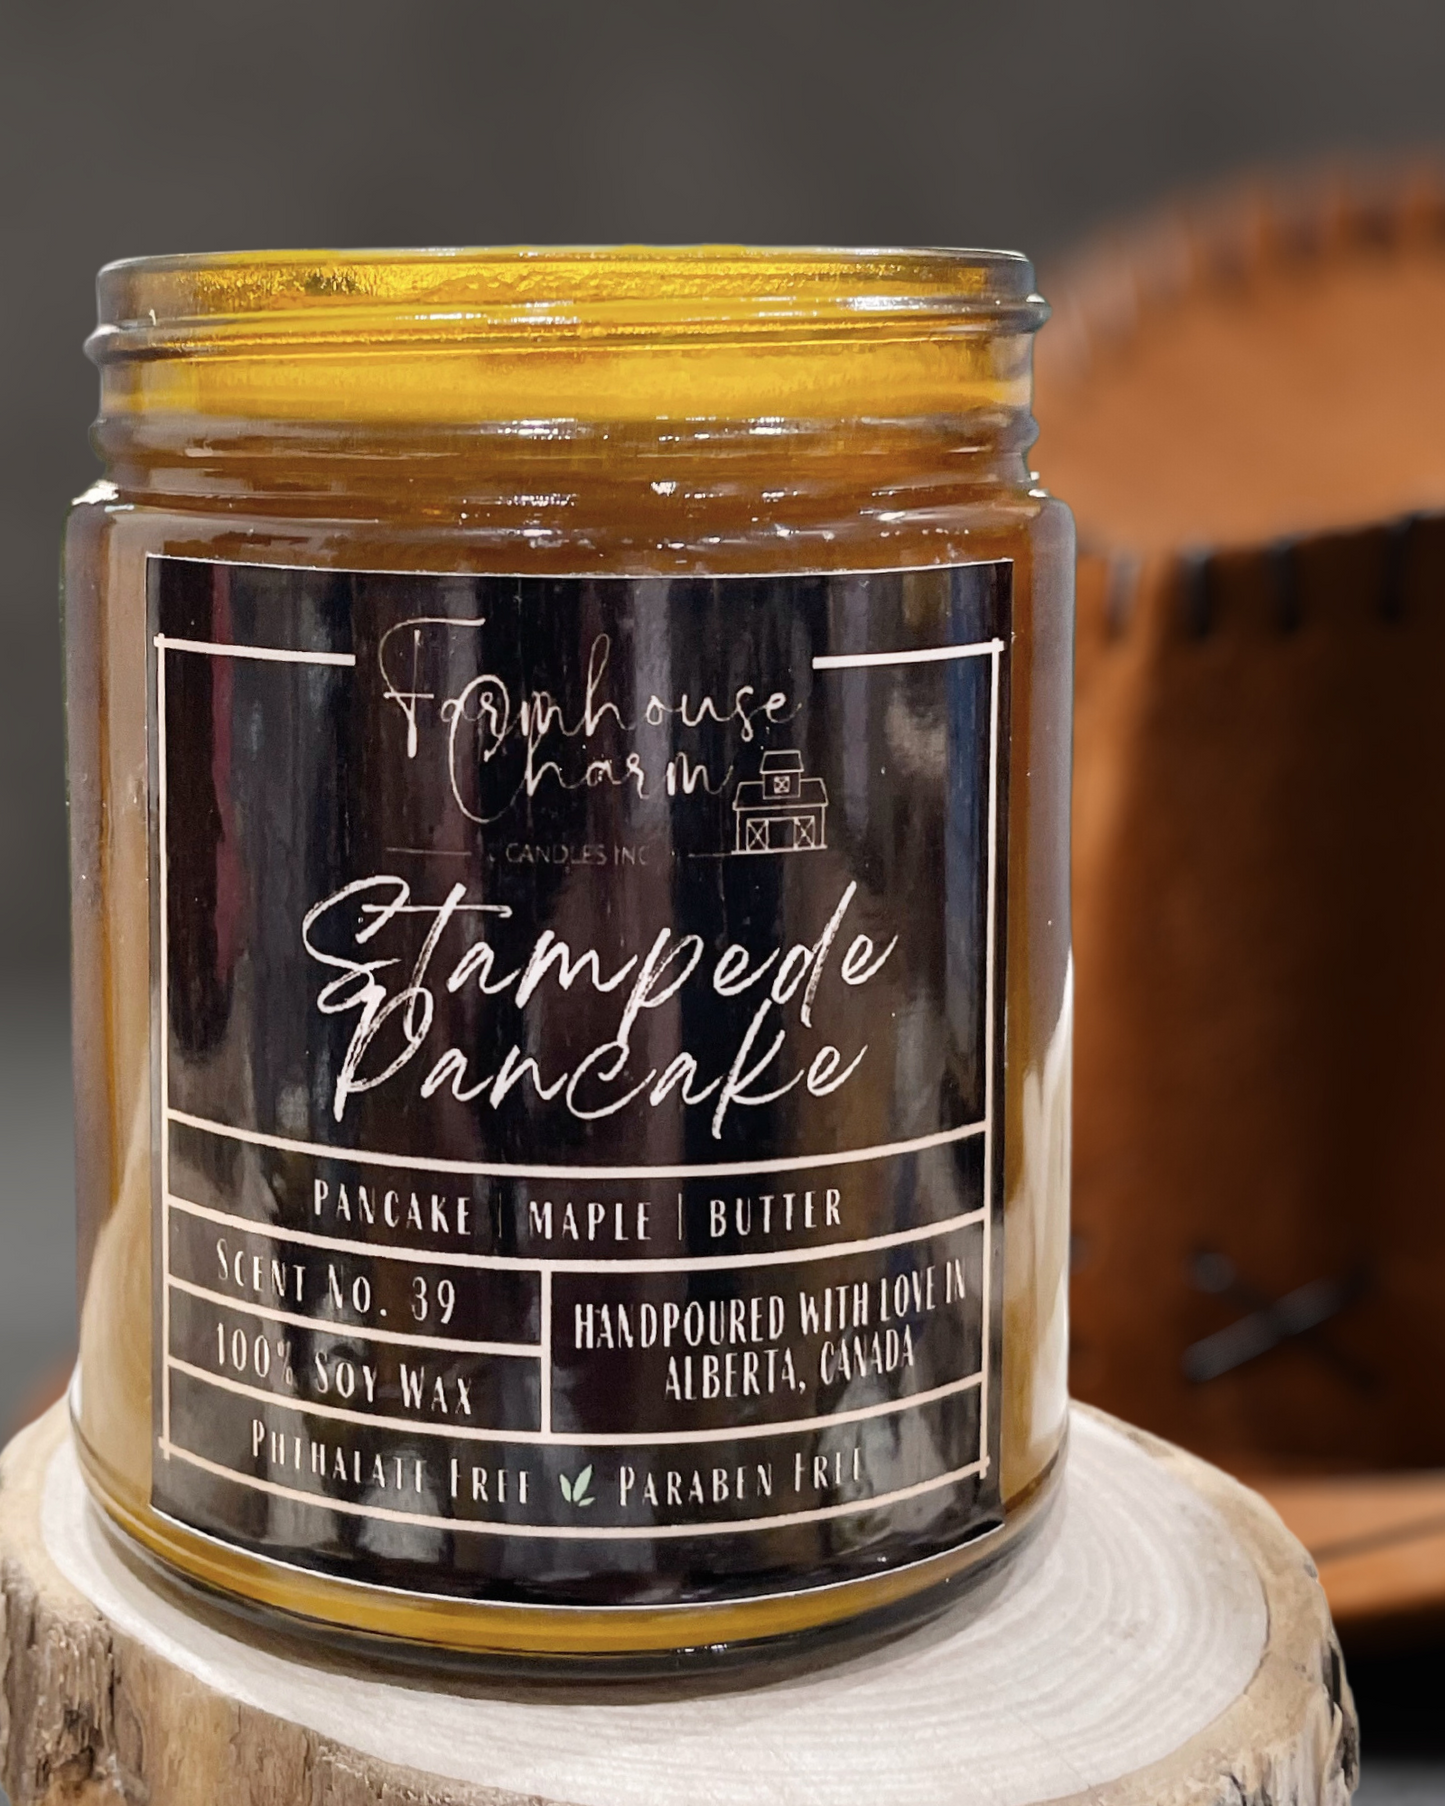 The Stampede Pancake - Farmhouse Charm Soy Candle is back by popular demand! Our customers couldn't get enough of this Calgary Stampede-inspired candle from last year. The warm buttery pancake scent is perfectly complemented with the sweet aroma of maple syrup, creating a delicious fragrance that will make your home smell like a classic breakfast. It's the perfect candle to celebrate the Stampede and create a warm, welcoming ambiance in your home. www.farmhousecharmcandles.com